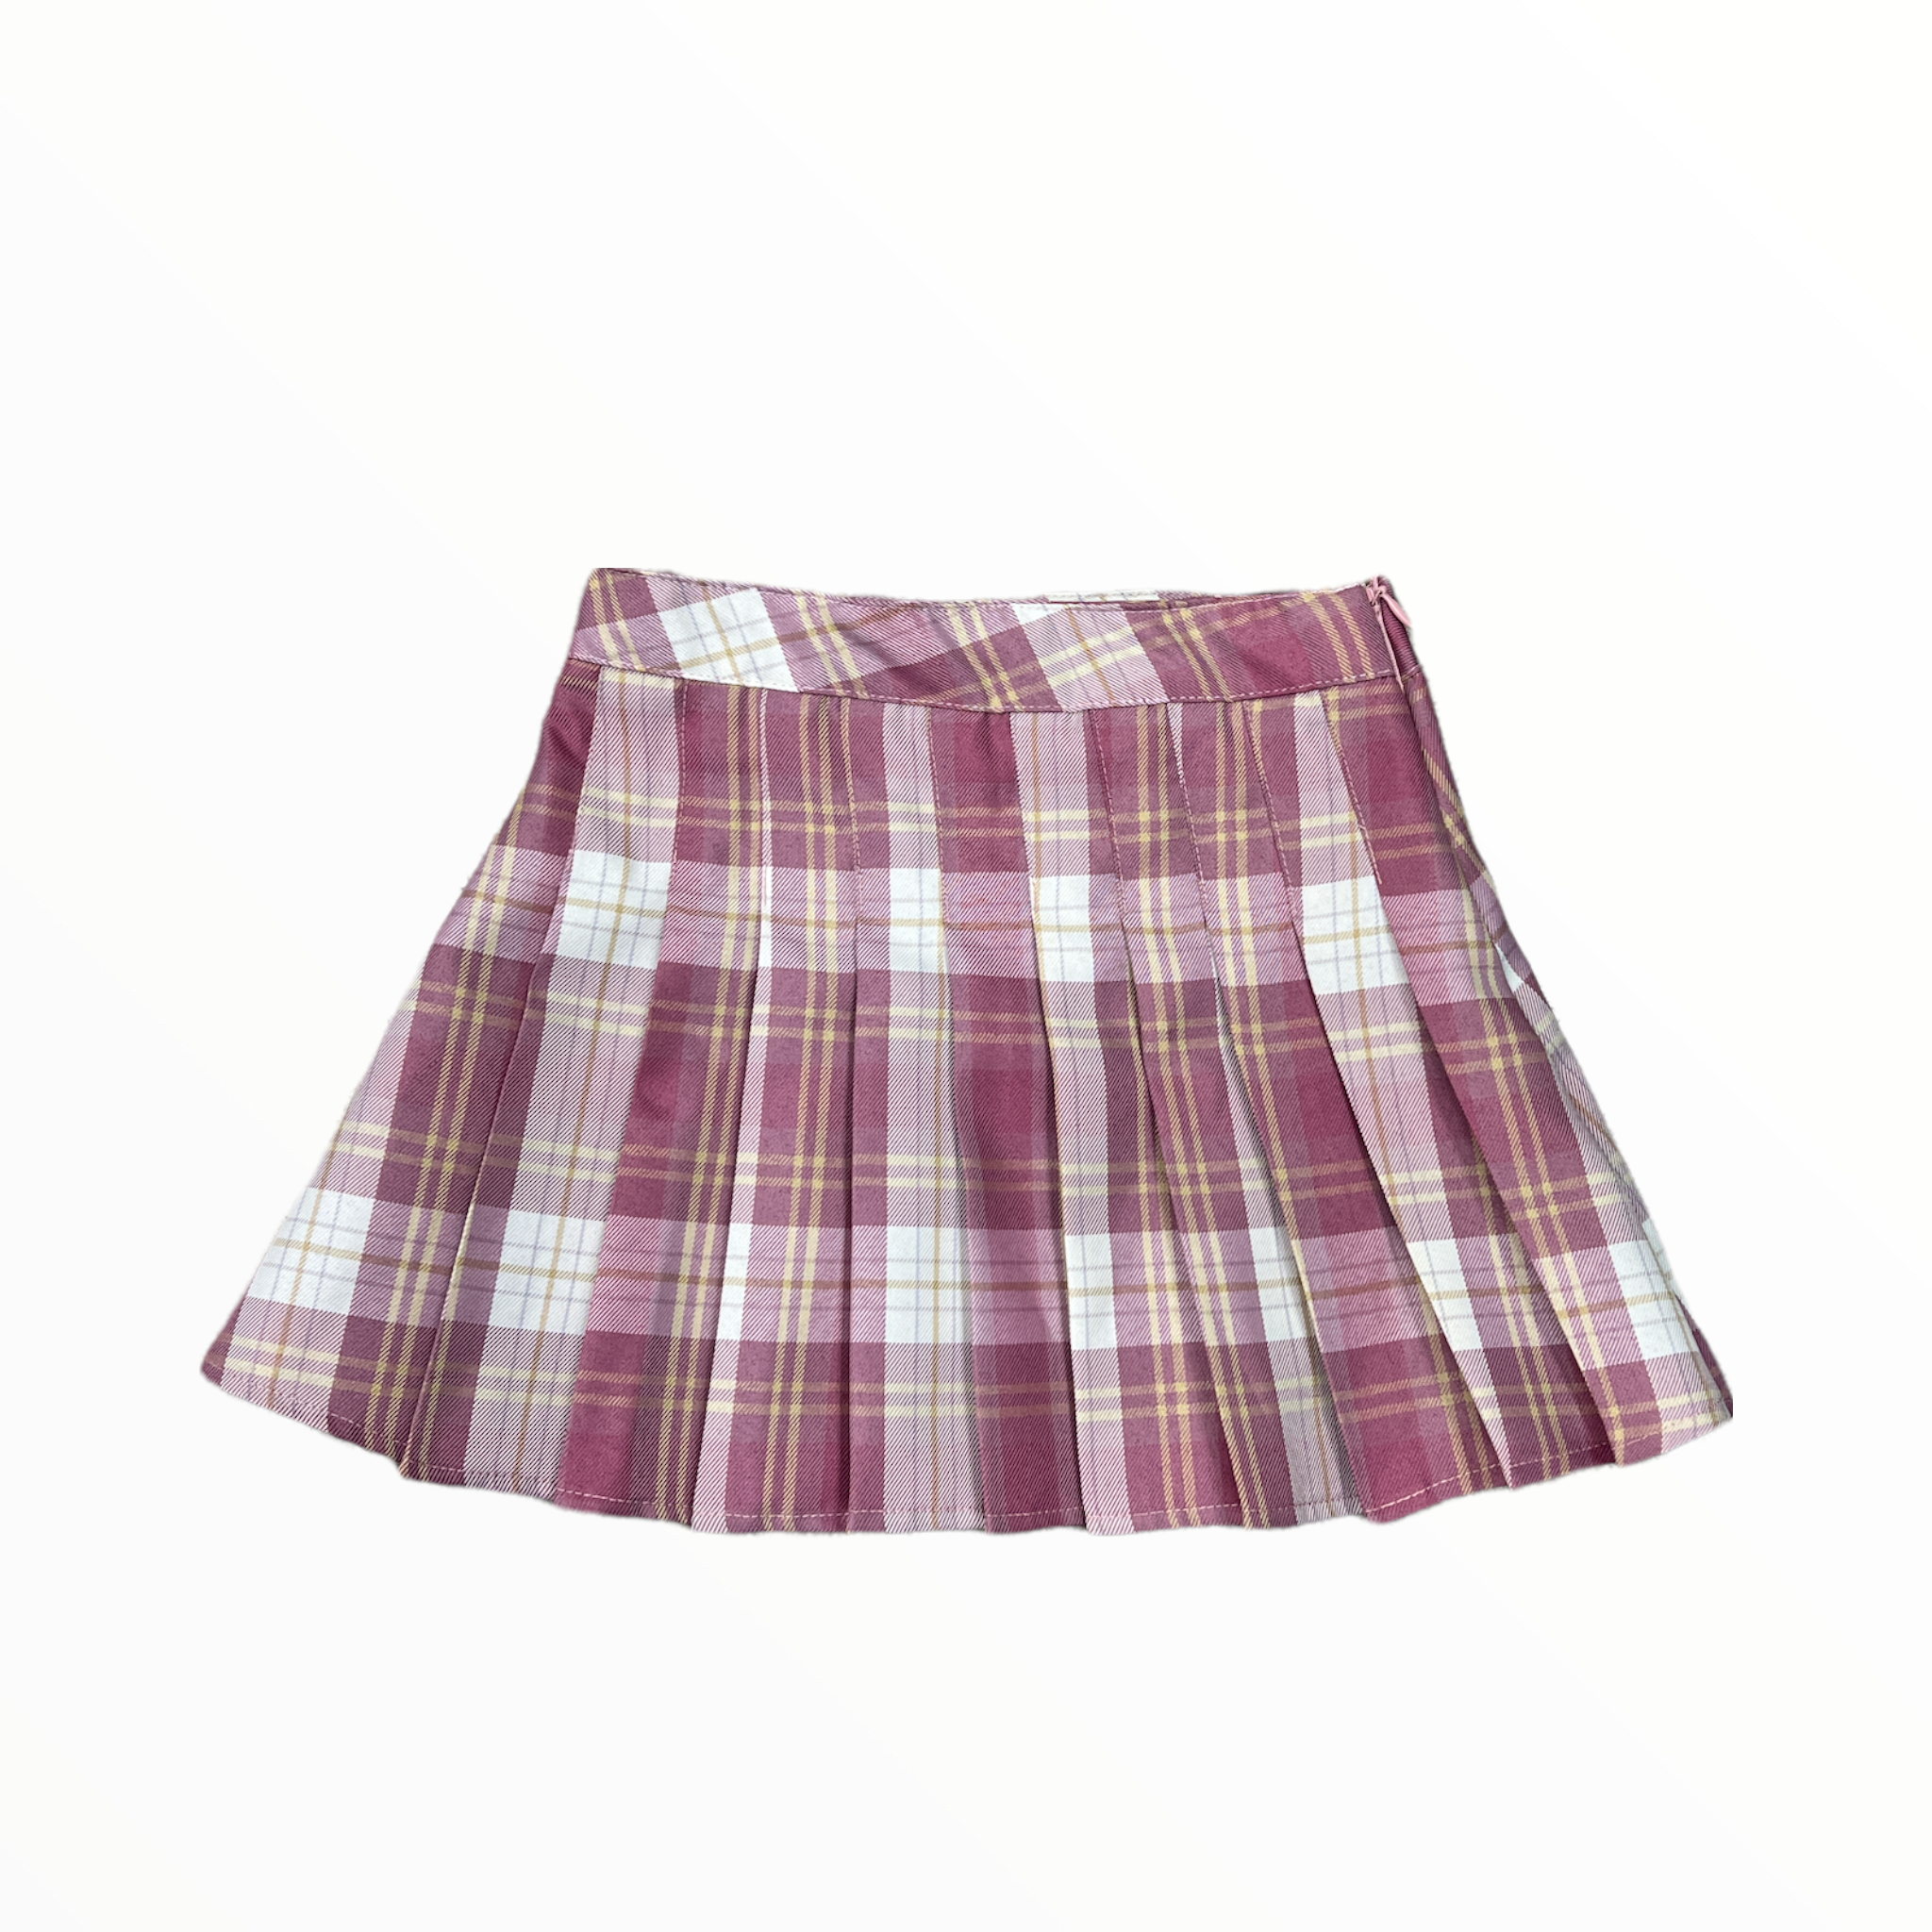 FLOWERS BY ZOE PLEATED SKIRT - PINK PLAID